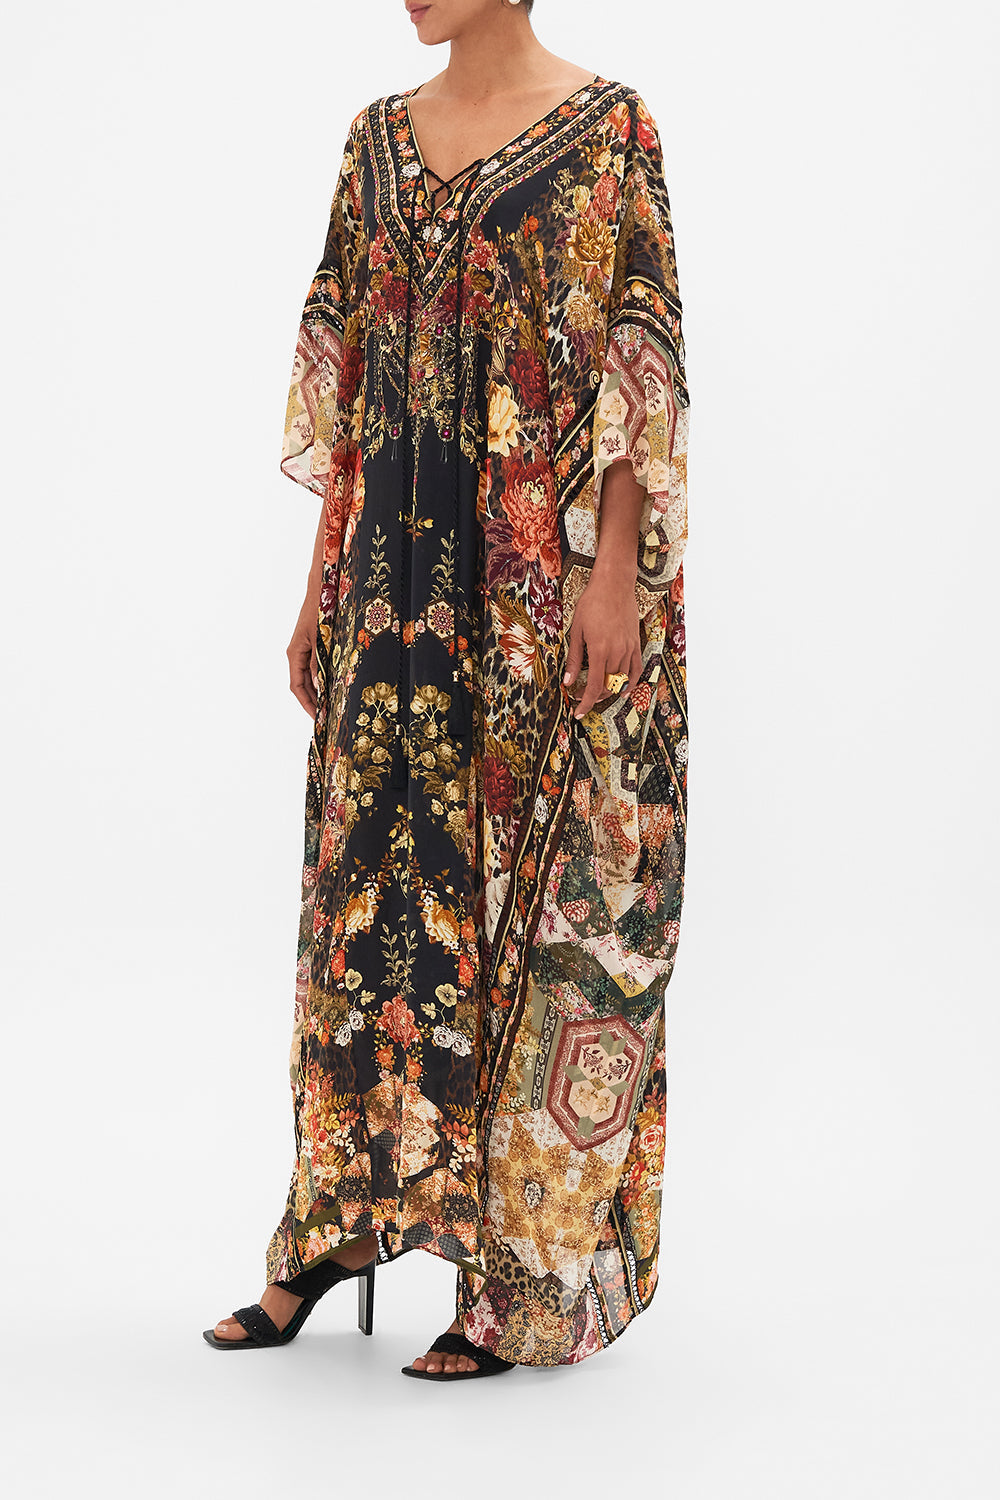 CAMILLA floral Spliced Kaftan in Stitched in Time